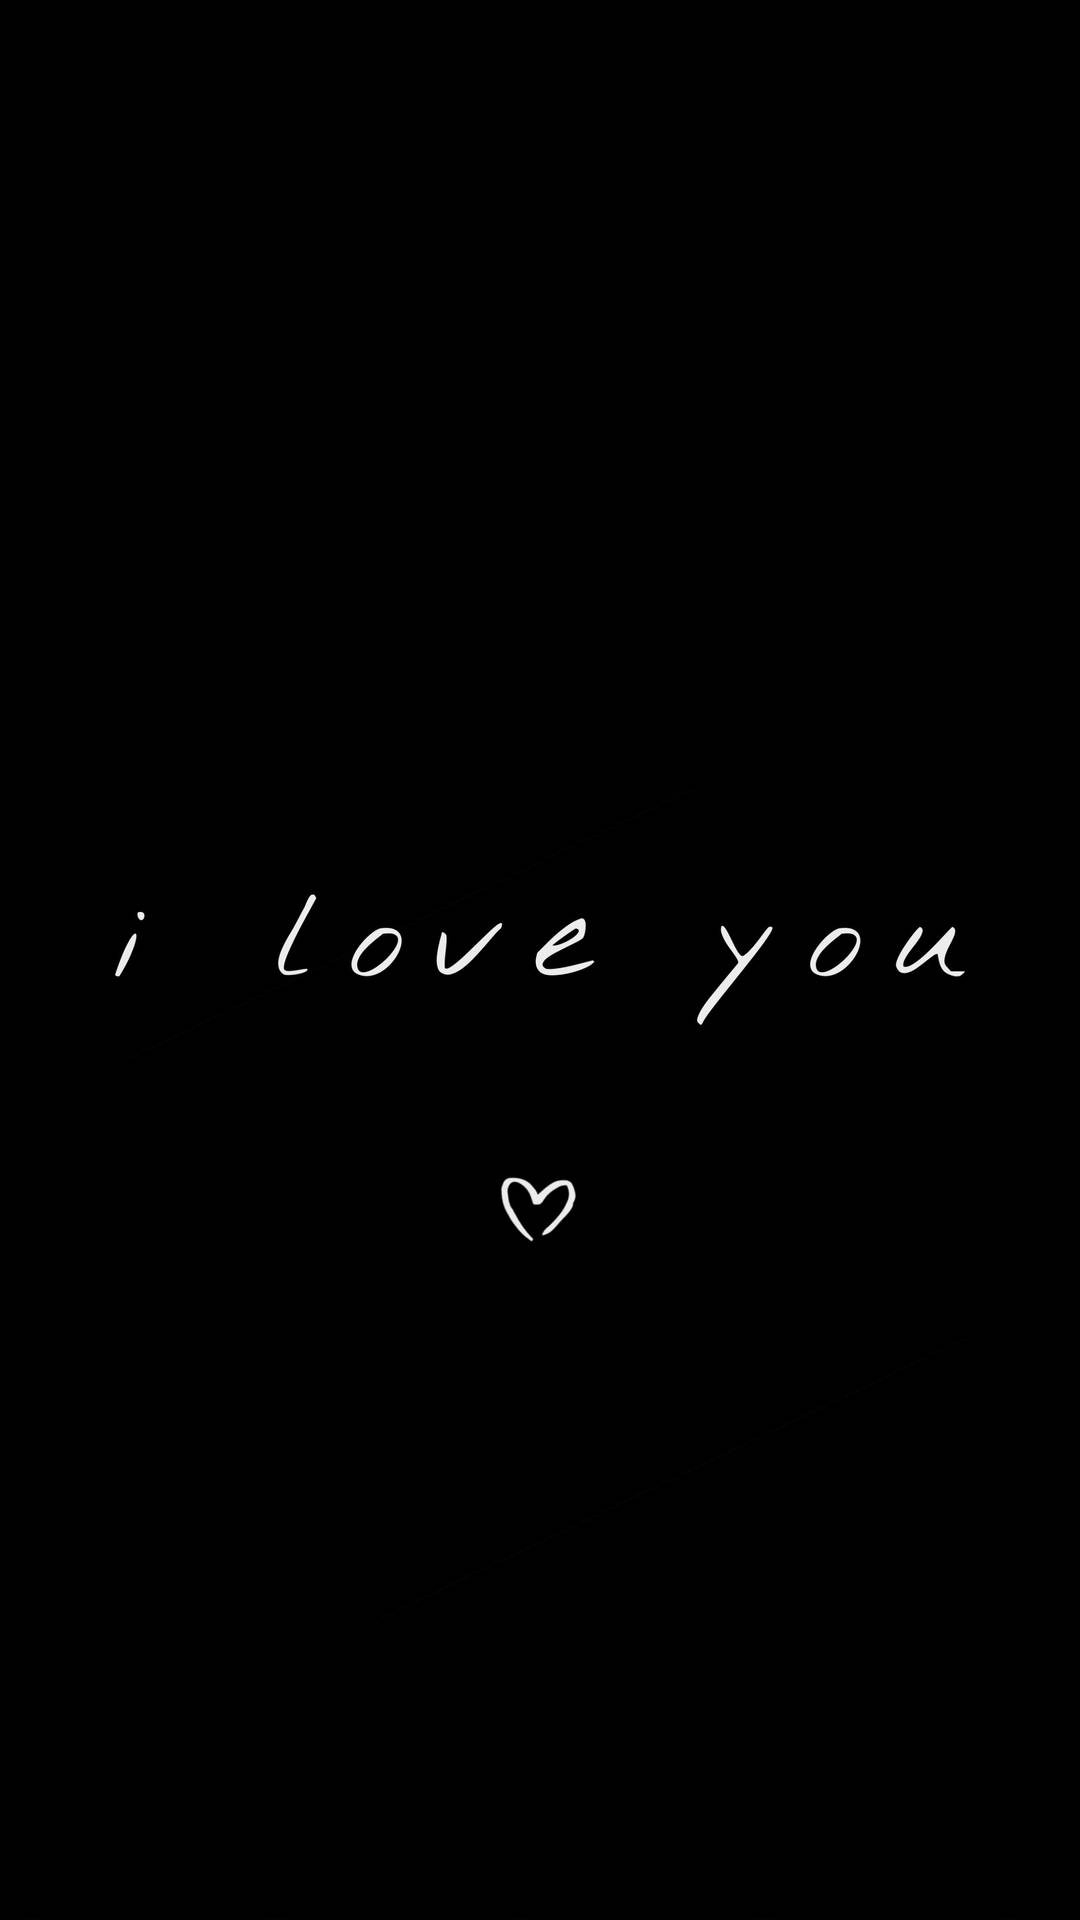 Free I Love You Wallpaper Downloads, [100+] I Love You Wallpapers for FREE  